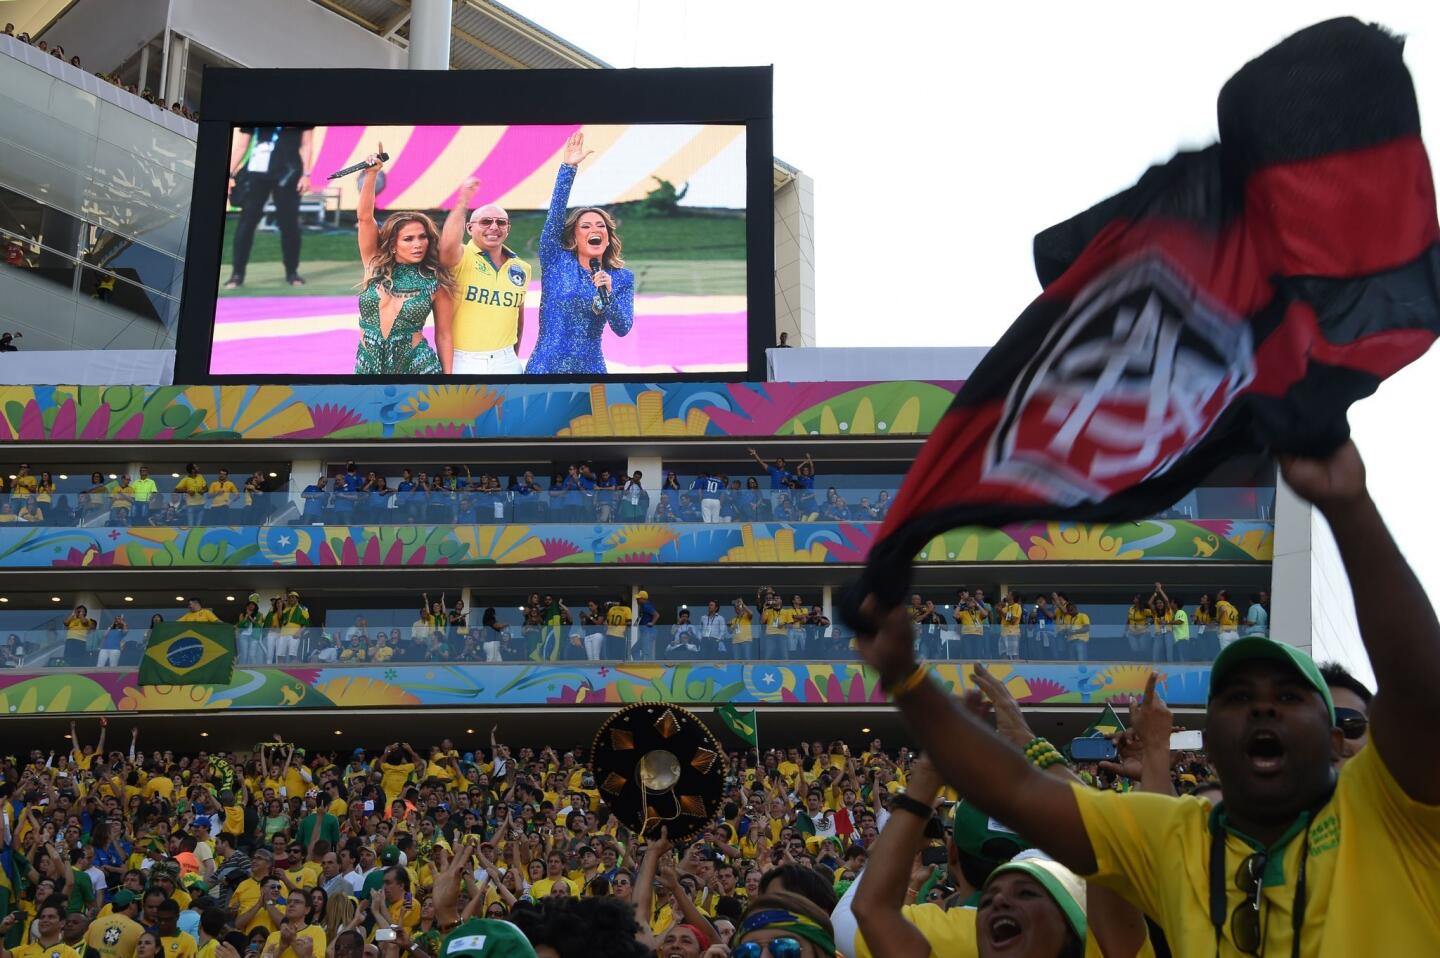 Fans cheer after the performance of (on screen, from left to right) Jennifer Lopez, Pitbull and Brazilian singer Claudia Leiite during opening ceremony of the 2014 FIFA football World Cup.